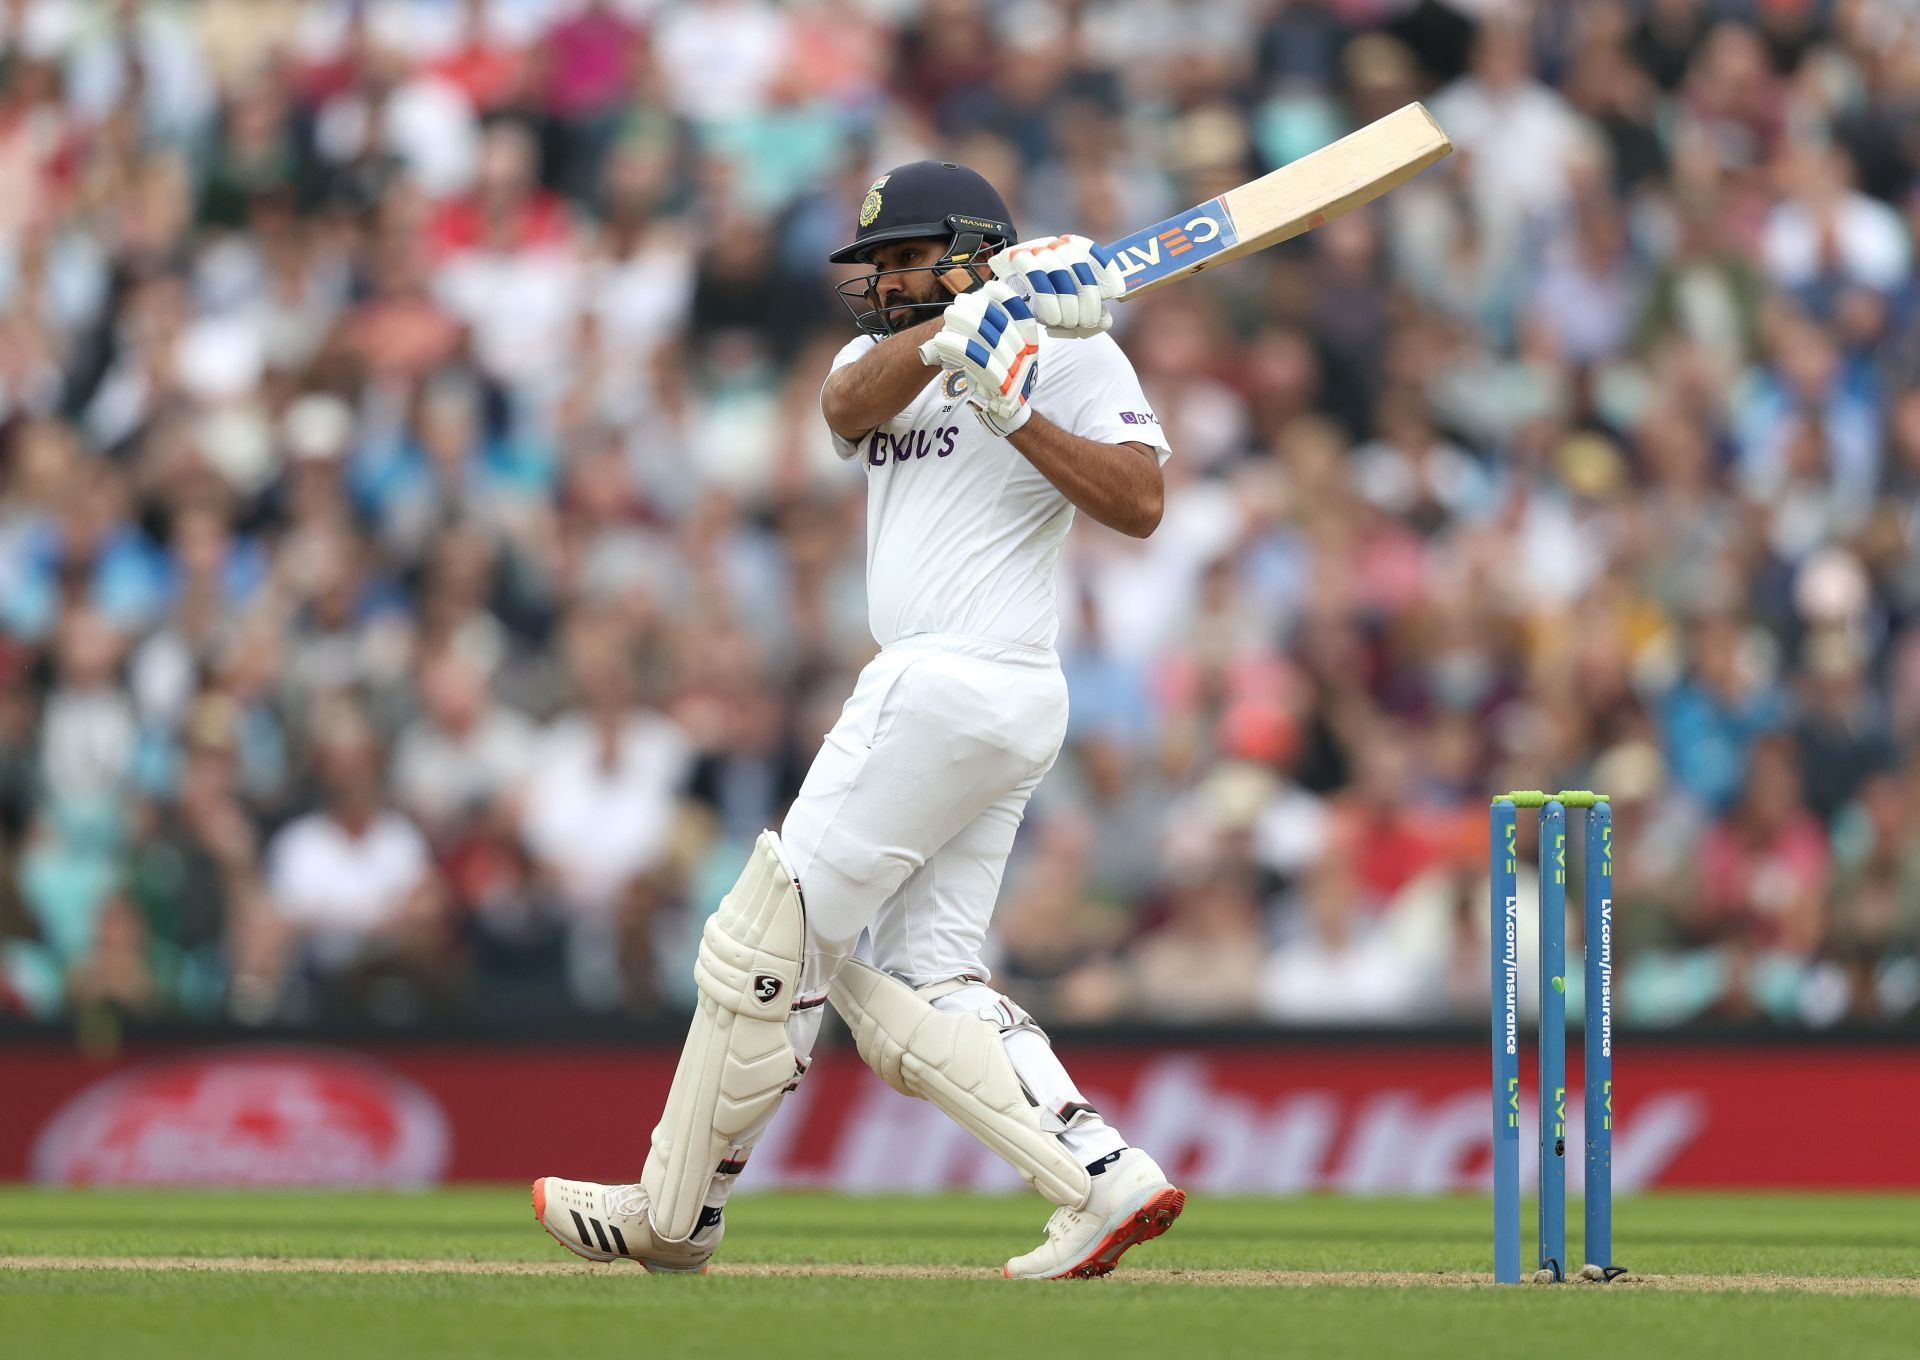 Rohit Sharma has stood out at the top of the order for Team India